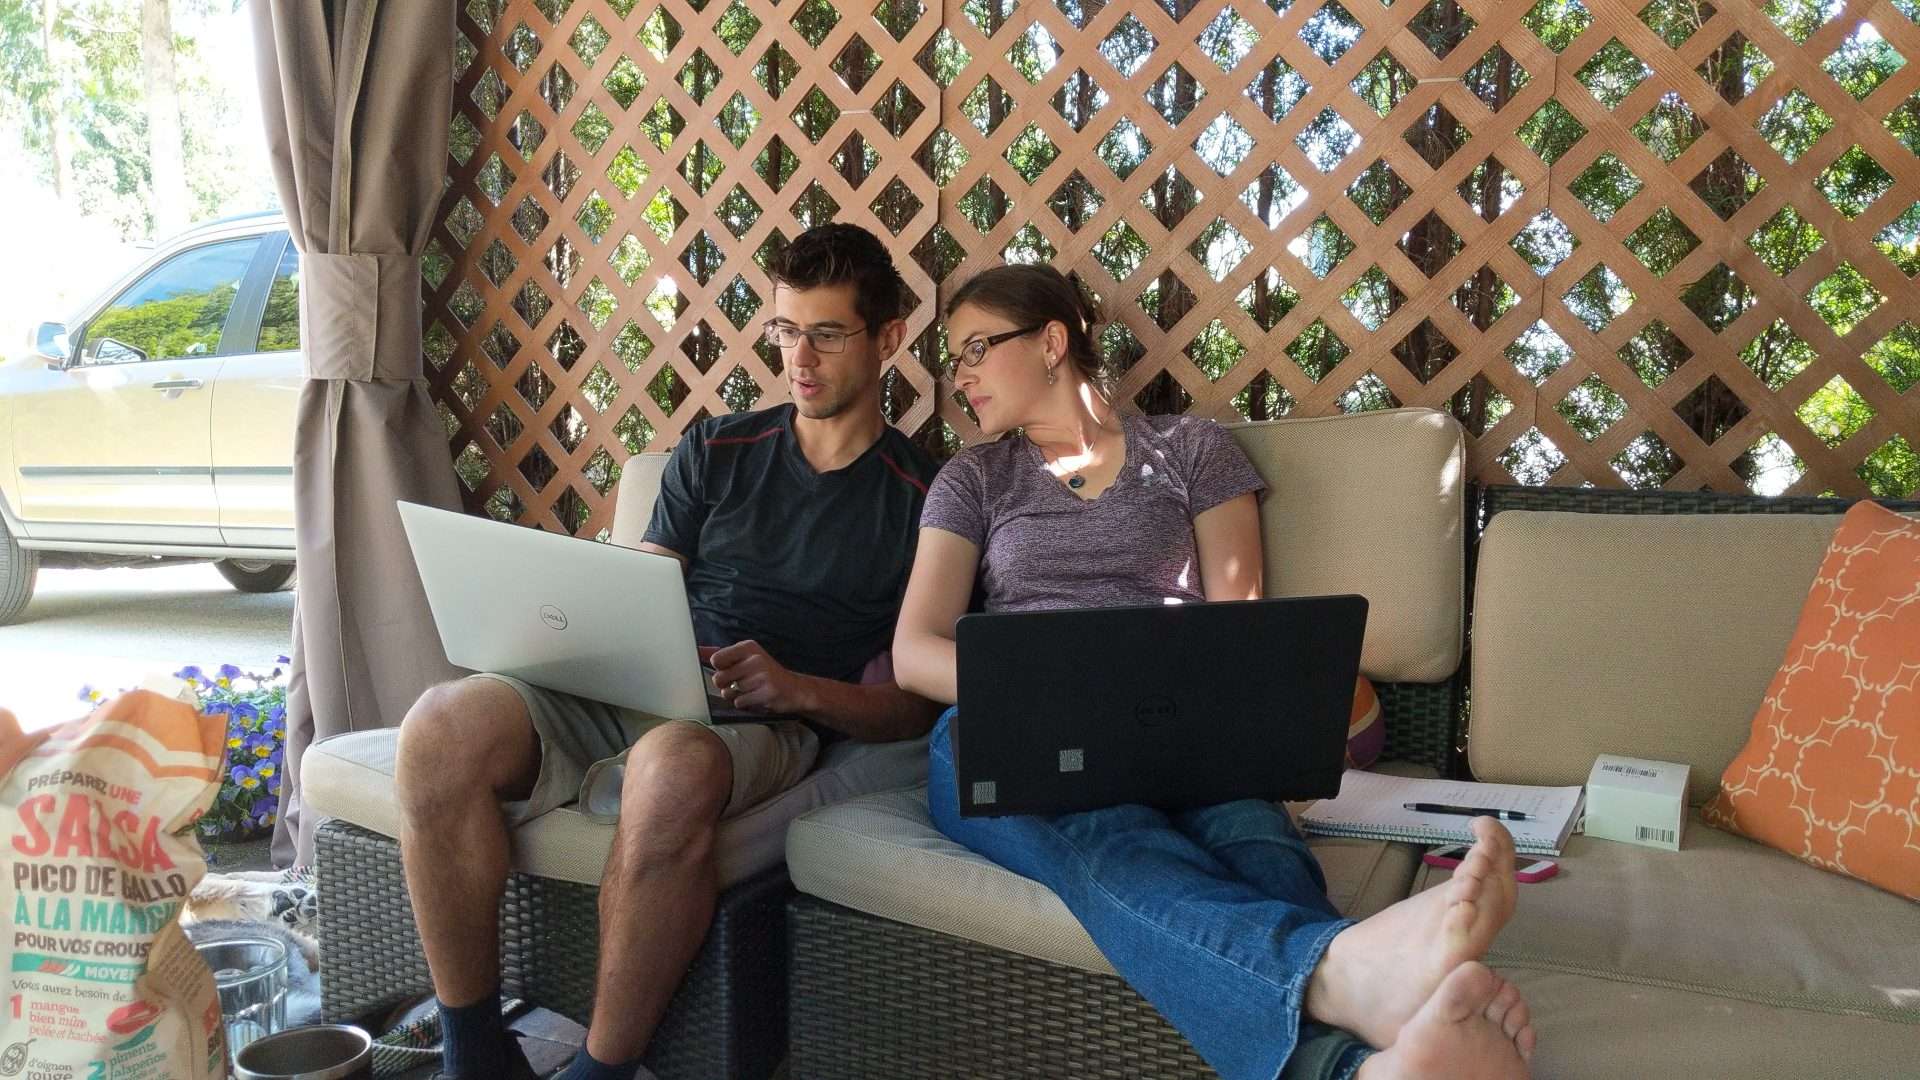 Tom and Cait doing research on their laptops